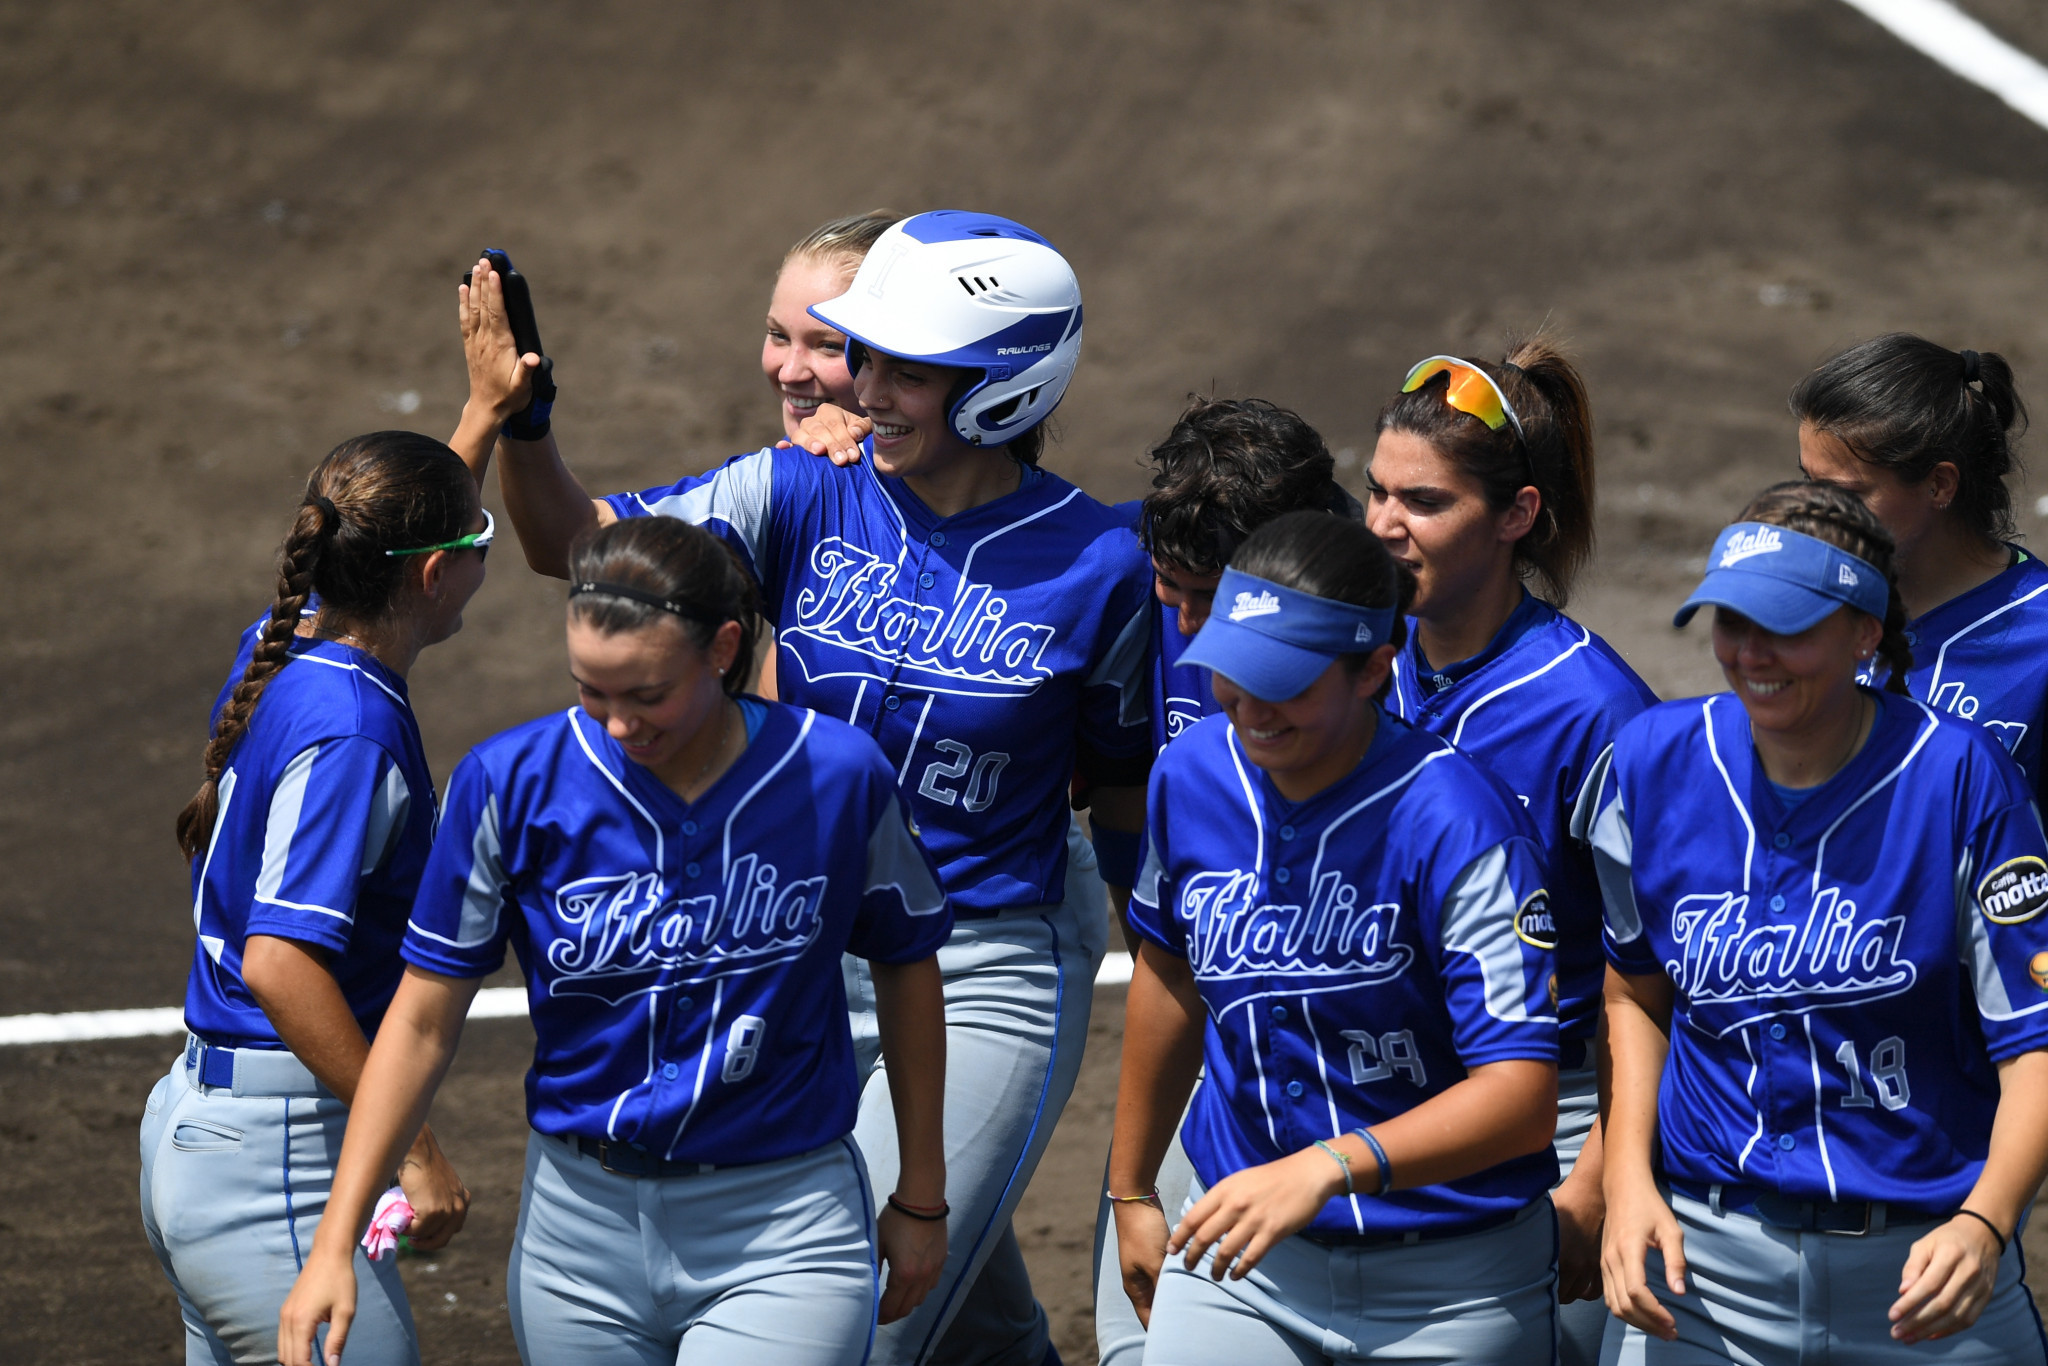 Hosts Italy stay perfect at Women's European Softball Championship